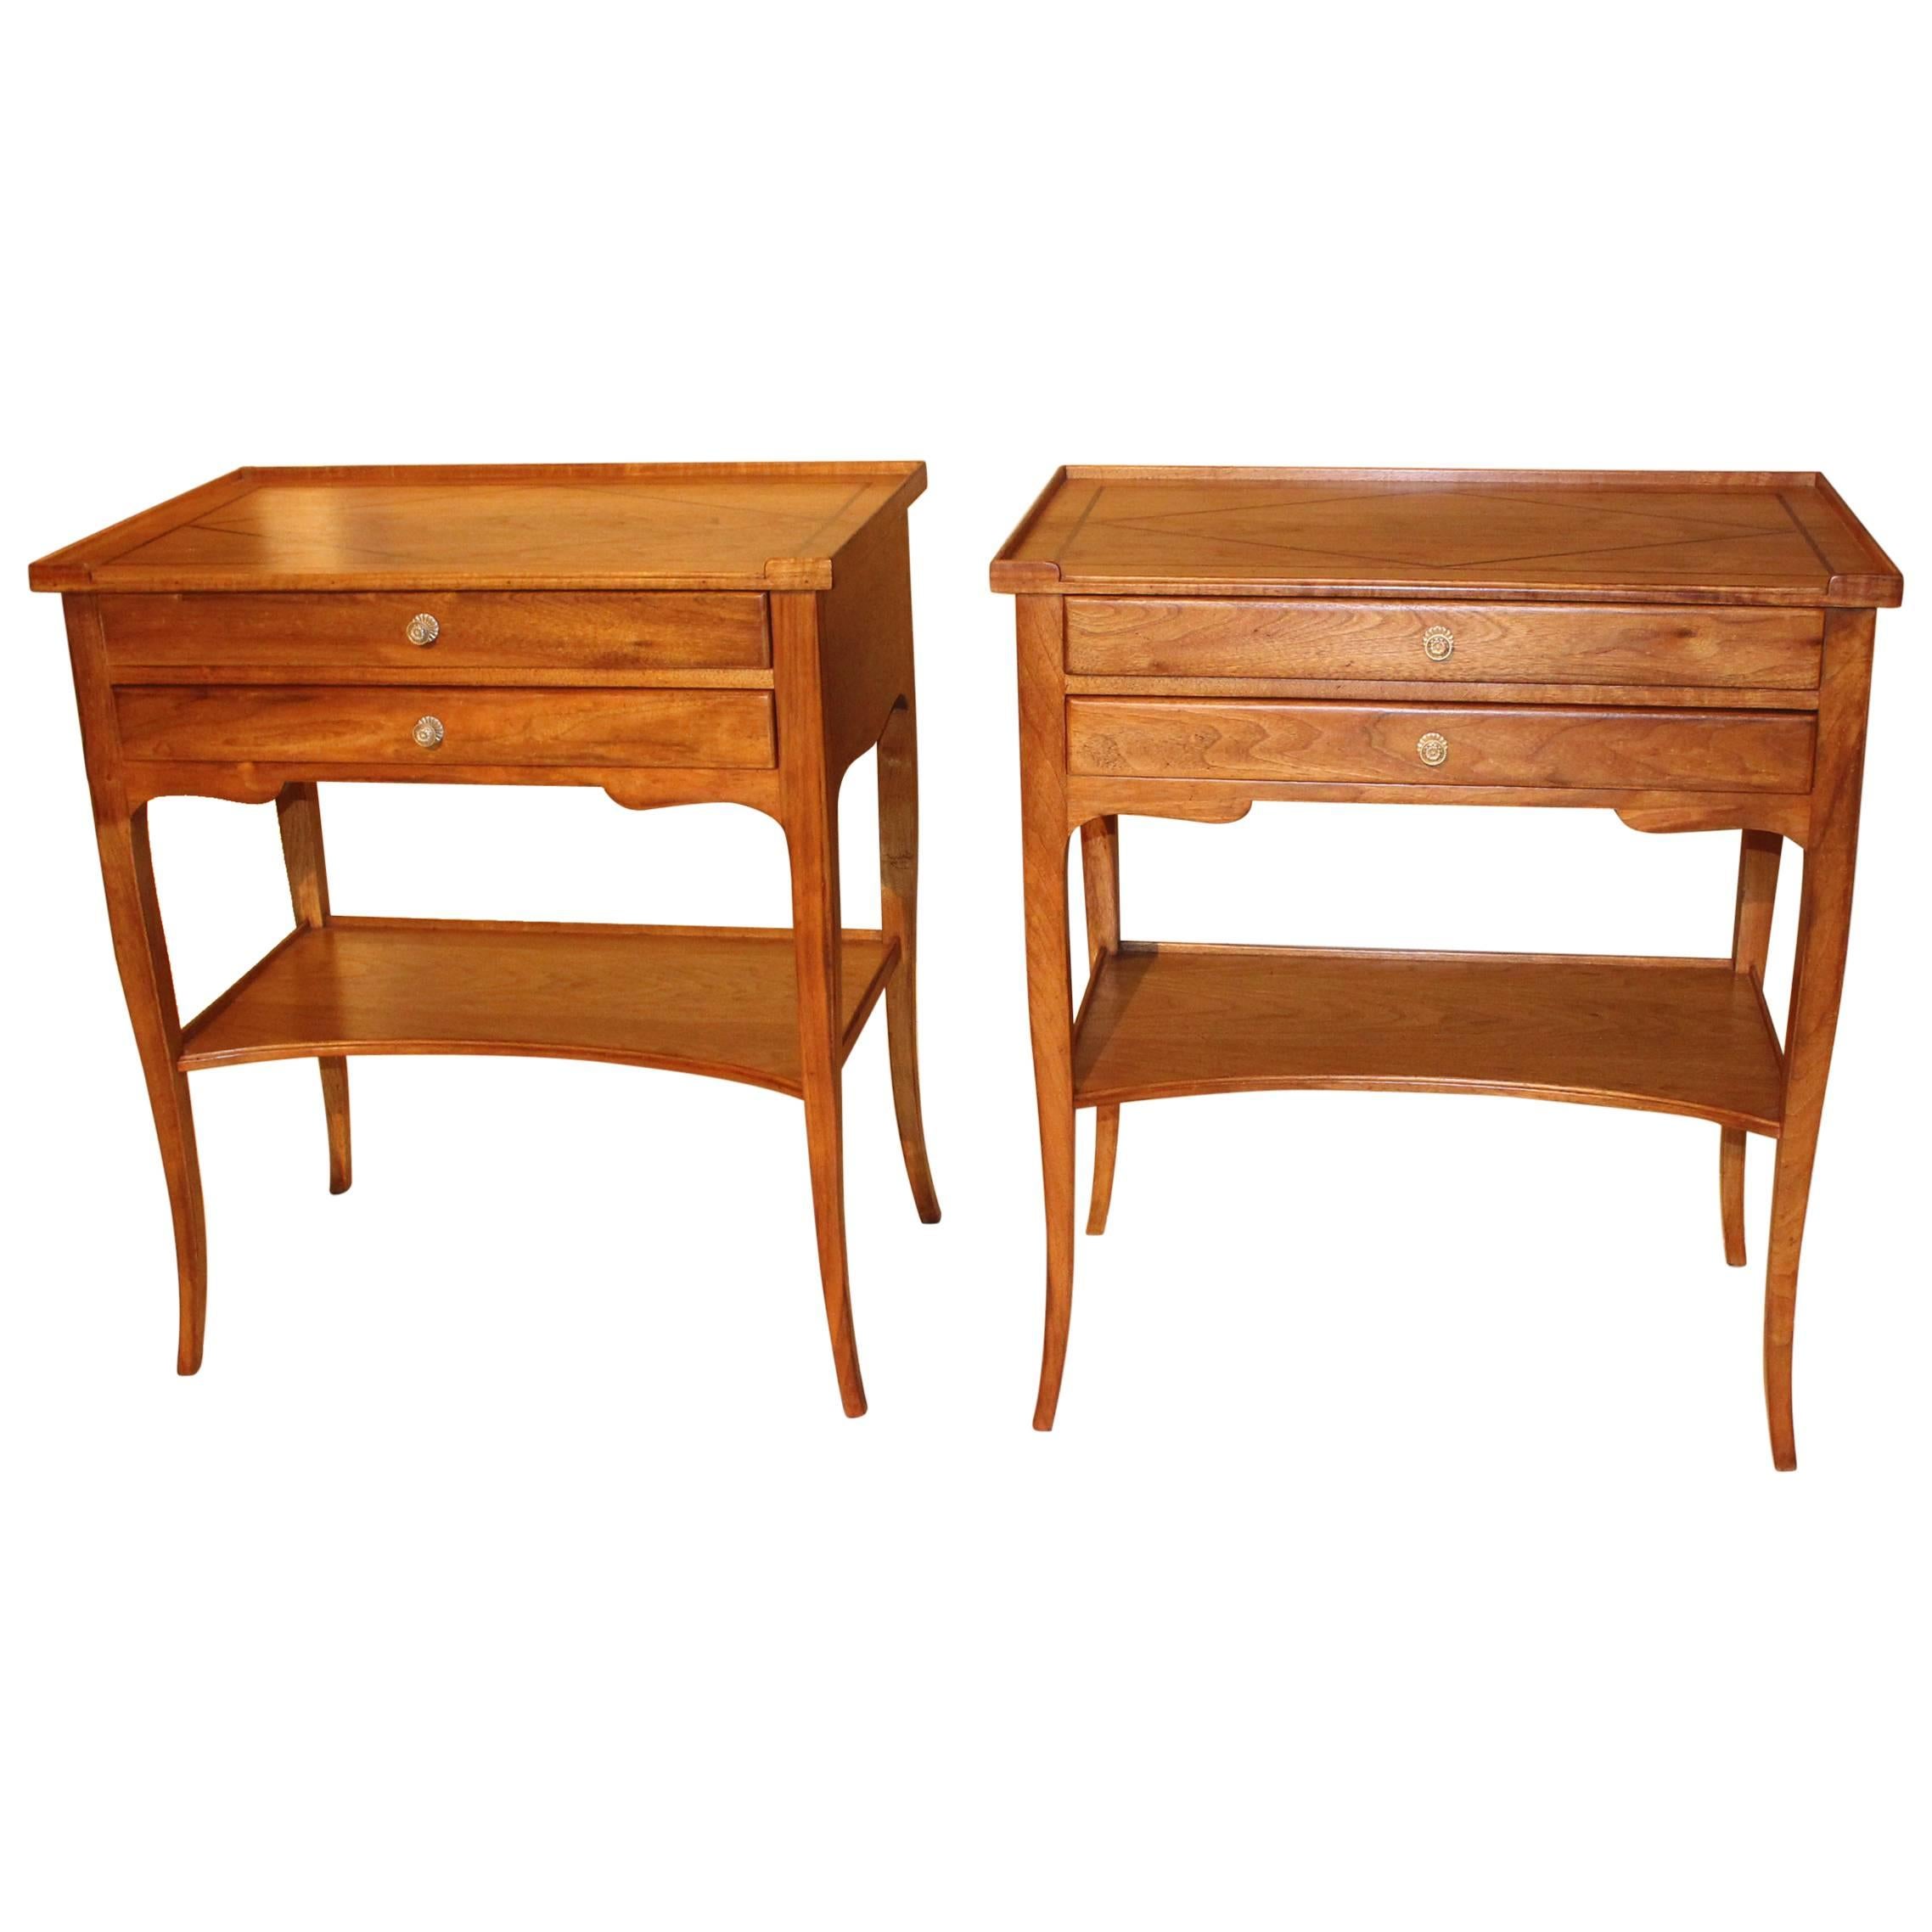 Pair of Early 20th Century Walnut Side Tables